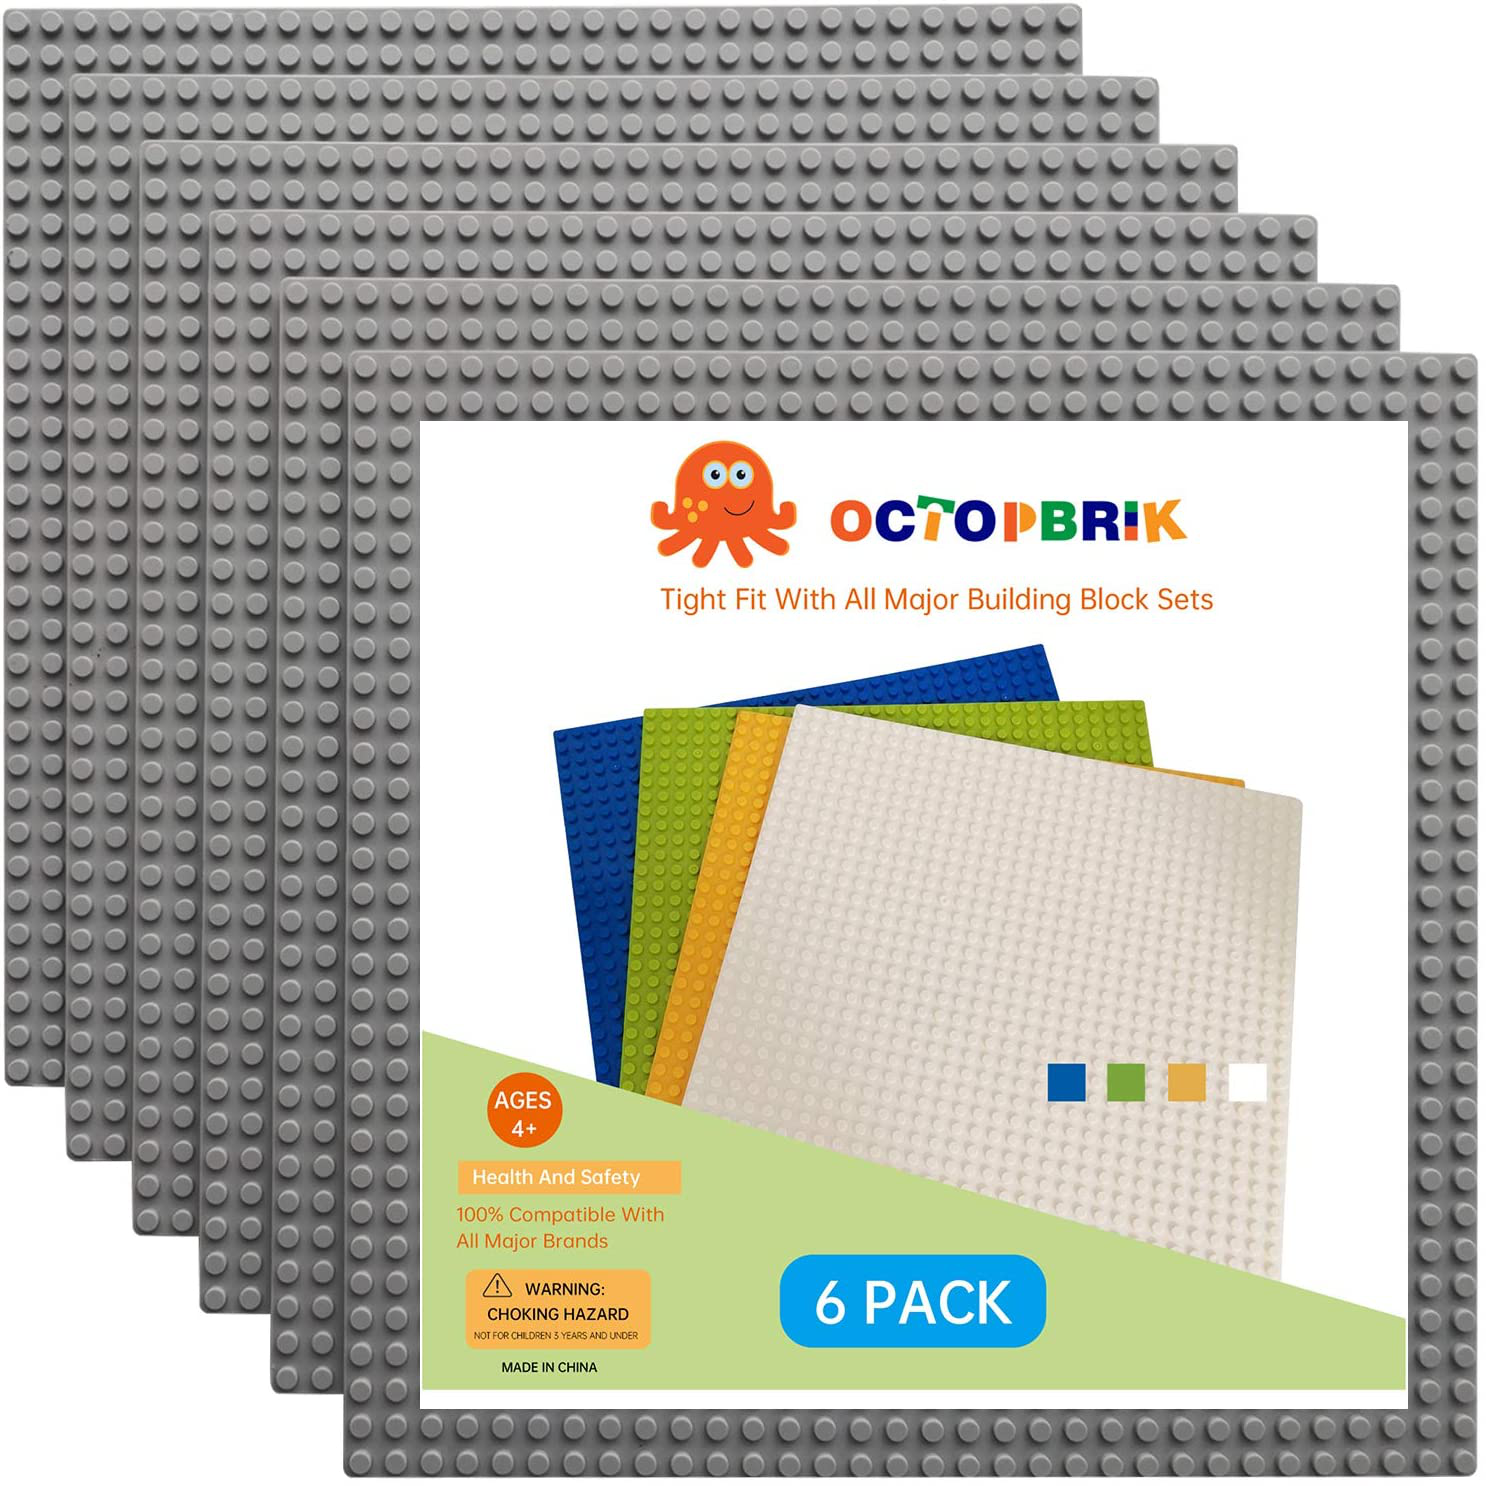 Octopbrik 6PCS Classic Baseplates, 10X10 Inches Base Plates, Compatible with Major Brands, 32X32 Pegs Large Platforms Accessory for Building Brick, Activity Table, and Displaying Toys (Multicolored)